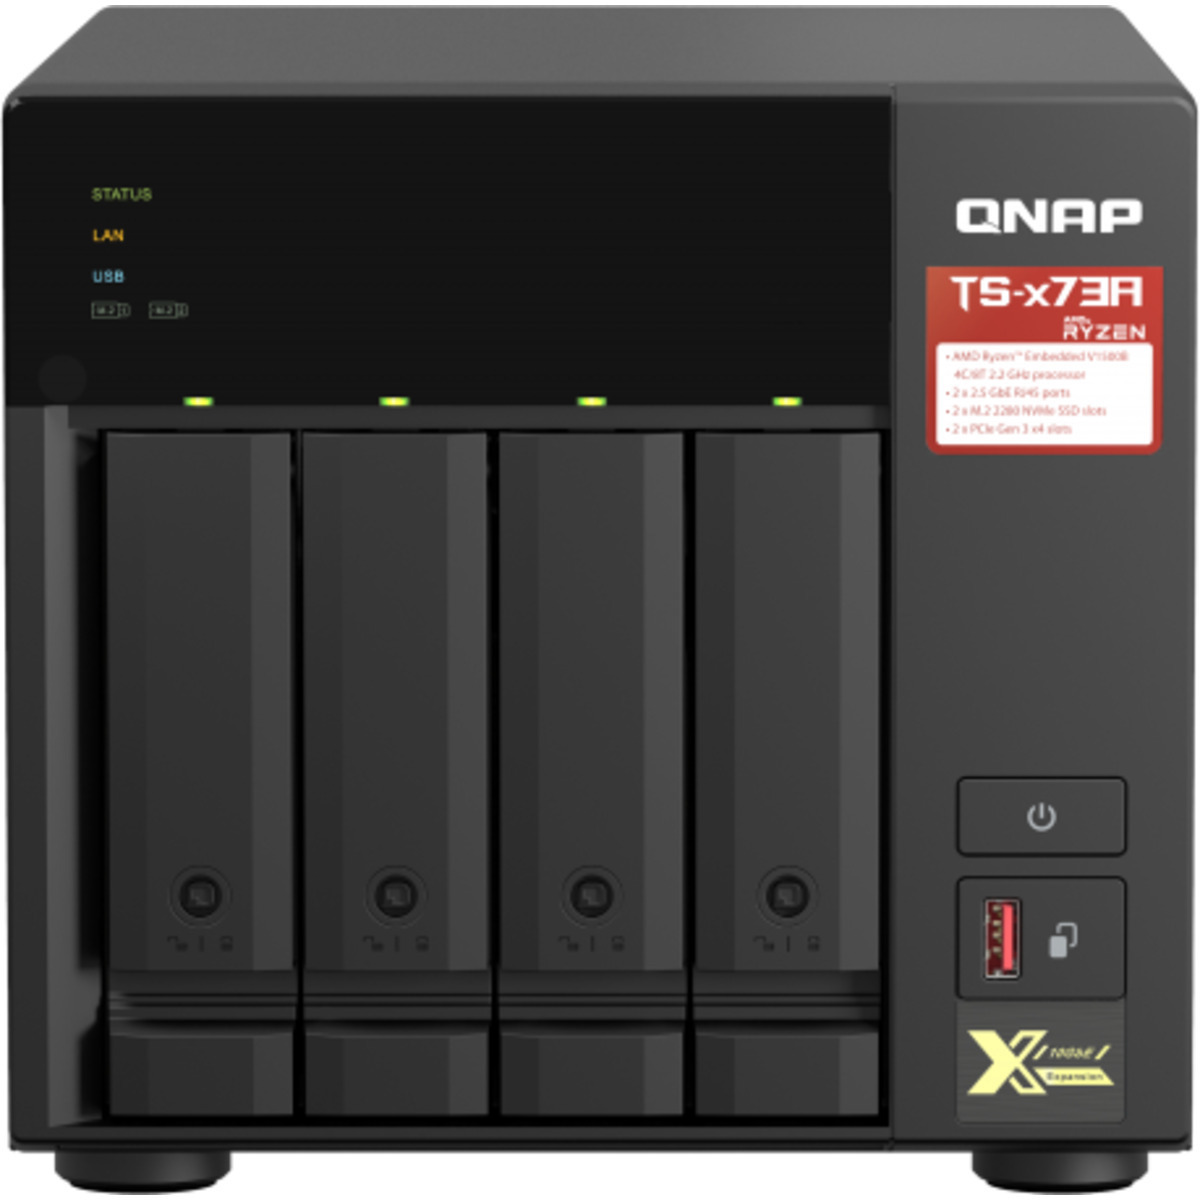 QNAP TS-473A 56tb 4-Bay Desktop Multimedia / Power User / Business NAS - Network Attached Storage Device 4x14tb Seagate IronWolf Pro ST14000NT001 3.5 7200rpm SATA 6Gb/s HDD NAS Class Drives Installed - Burn-In Tested TS-473A